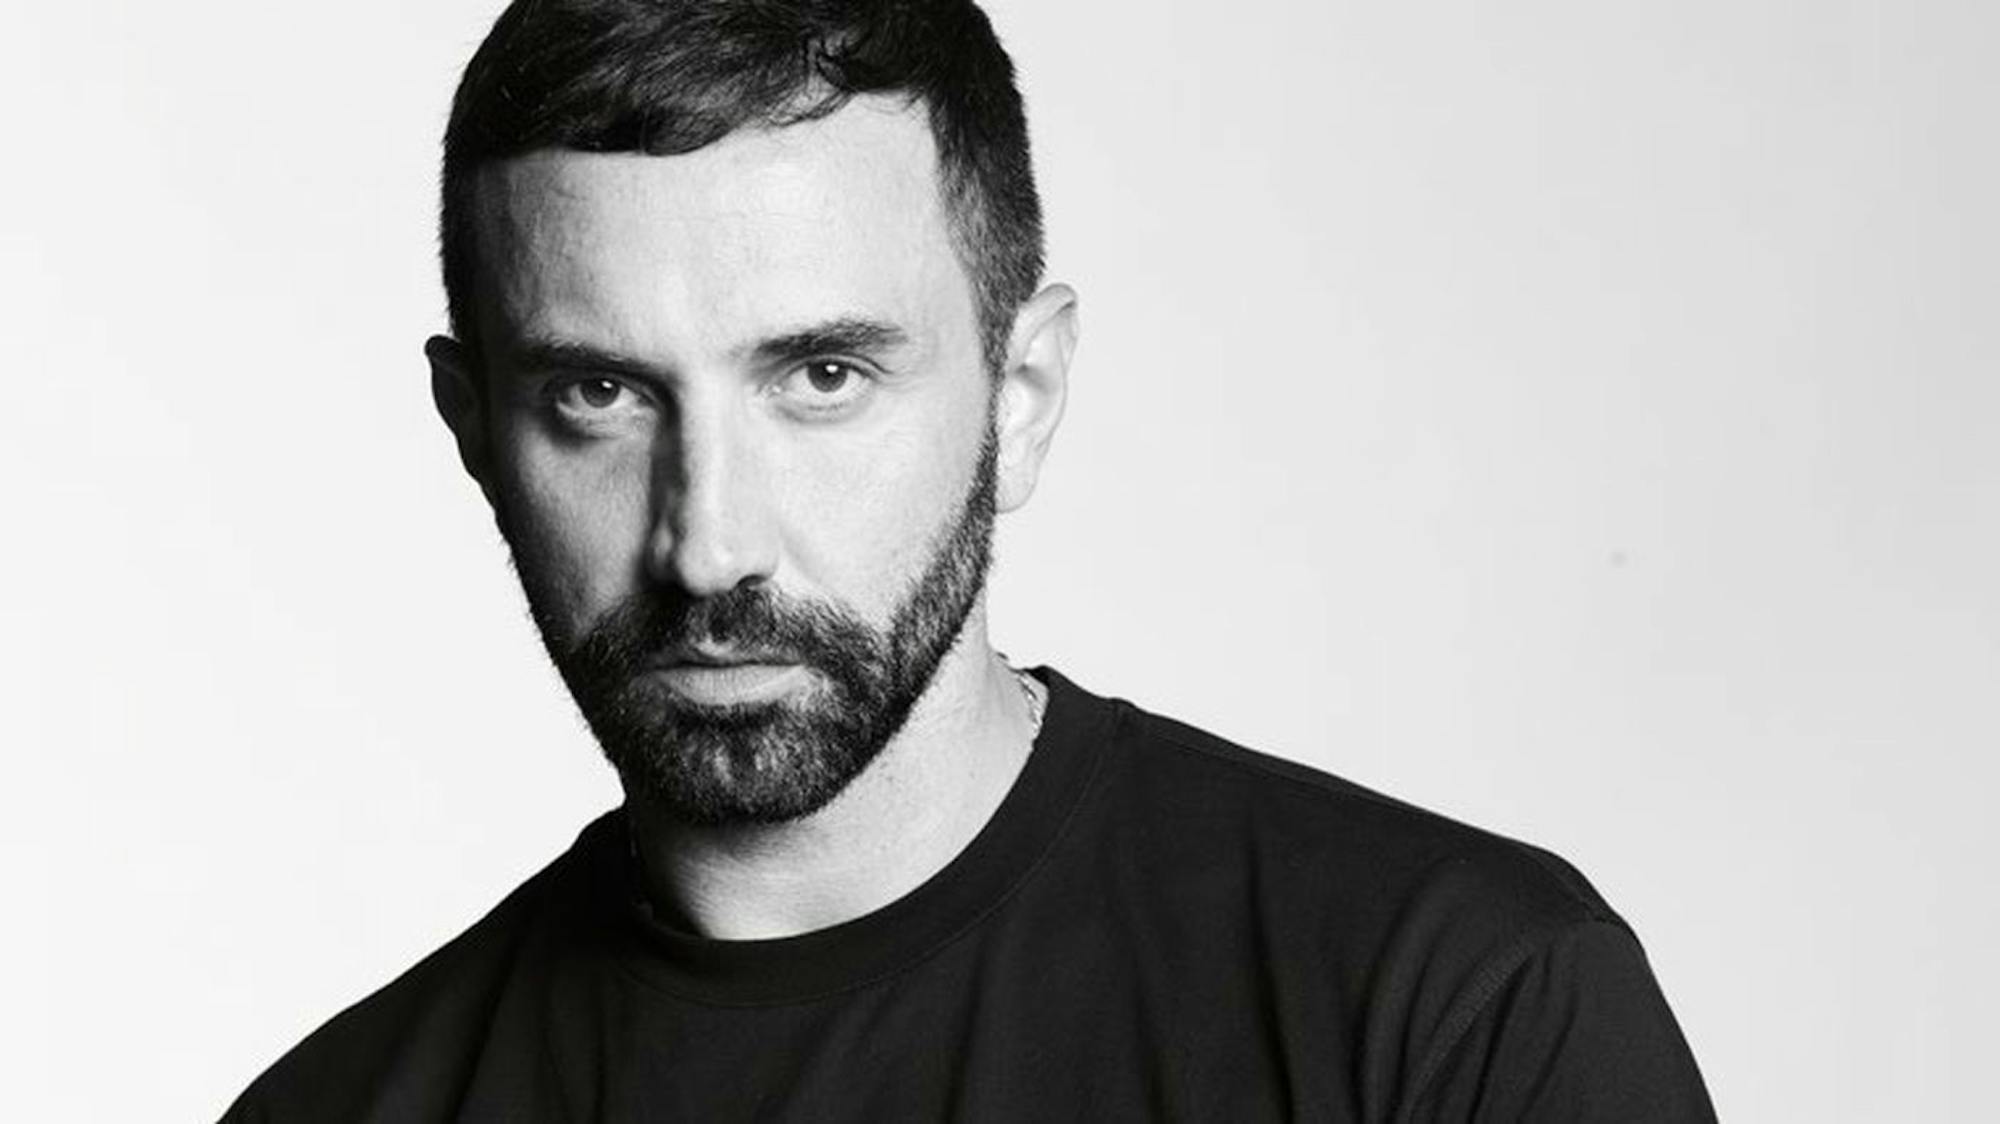 Burberry appoints Riccardo Tisci as Chief Creative Officer  